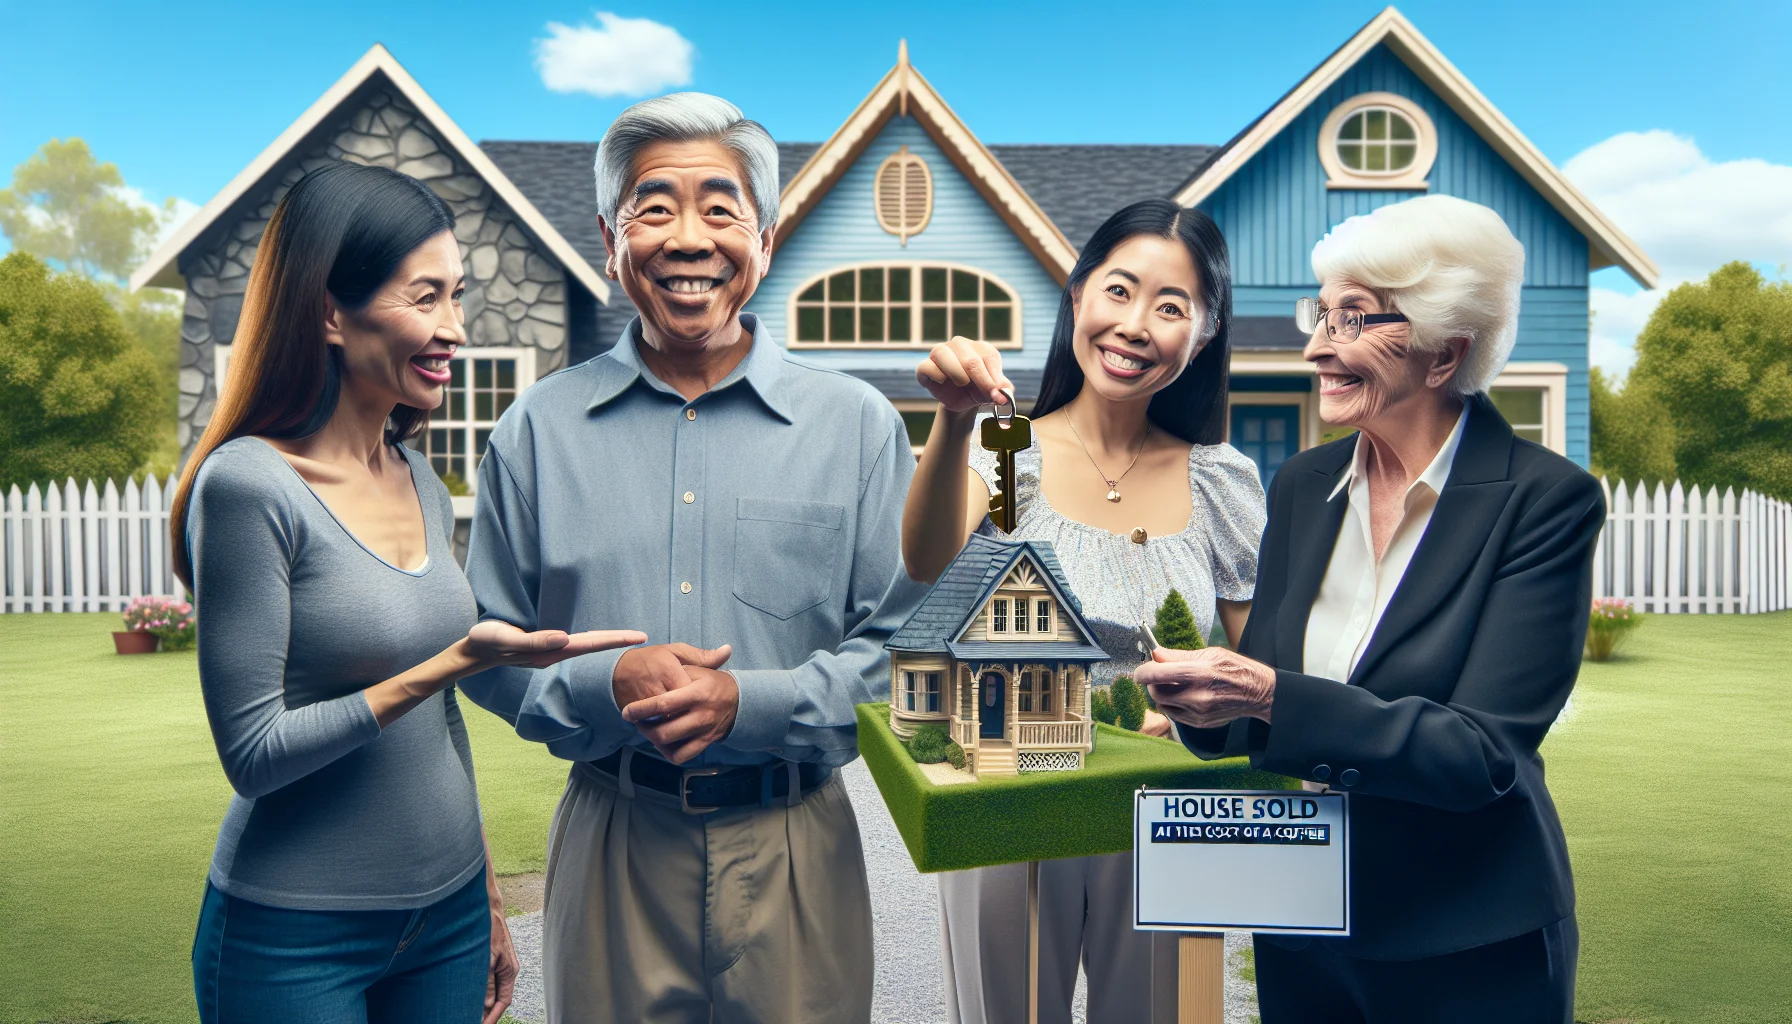 Construct a humorous, hyper-realistic image centered on the concept of ideal homeownership in the context of real estate. The scene unfolds in a serene suburban neighborhood with cookie-cutter houses. A middle-aged Asian man and a young Hispanic woman, both wearing casual attire, are proudly displaying oversized keys to their new homes. They are standing in front of a quirky house which looks like a mini-castle having a perfect lawn. A sign nearby reads: 'Houses sold at the cost of a coffee' while a real estate agent with an absurdly wide smile, who is an elderly White woman, hands them the keys.